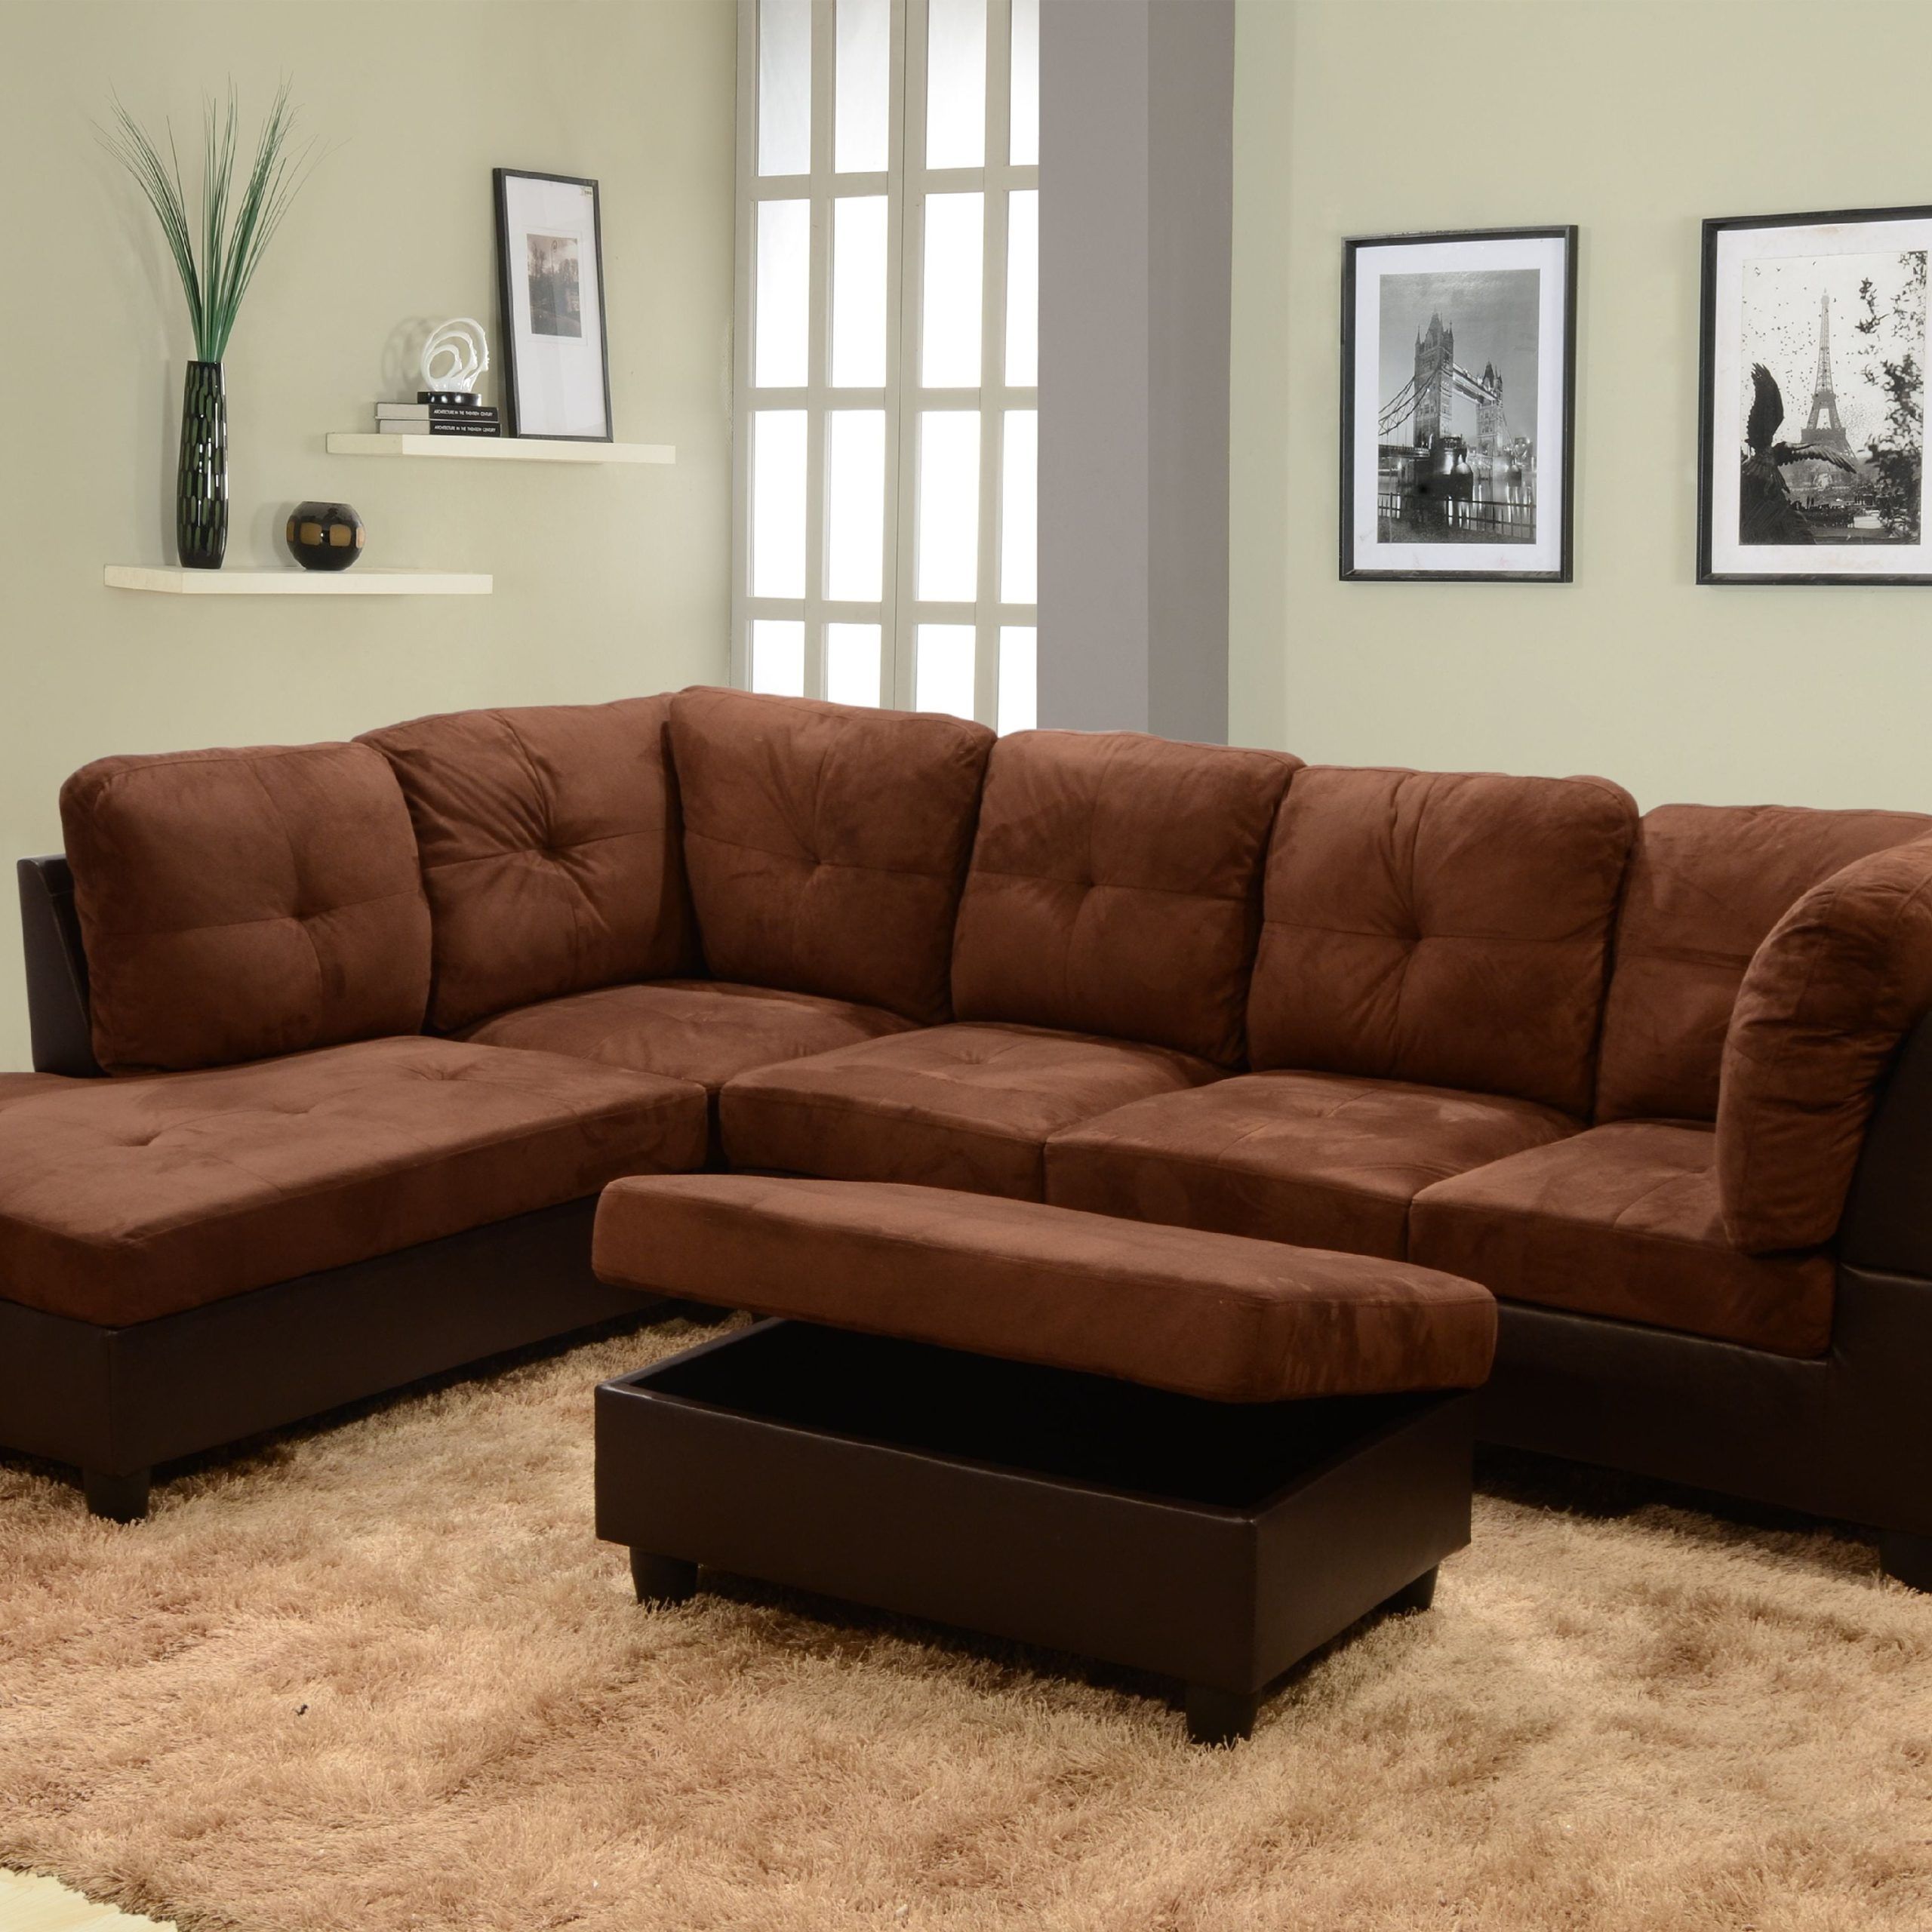 Sofas In Chocolate Brown With Regard To Well Known Matt Right Facing Sectional Sofa With Ottoman,chocolate – Walmart (View 7 of 15)